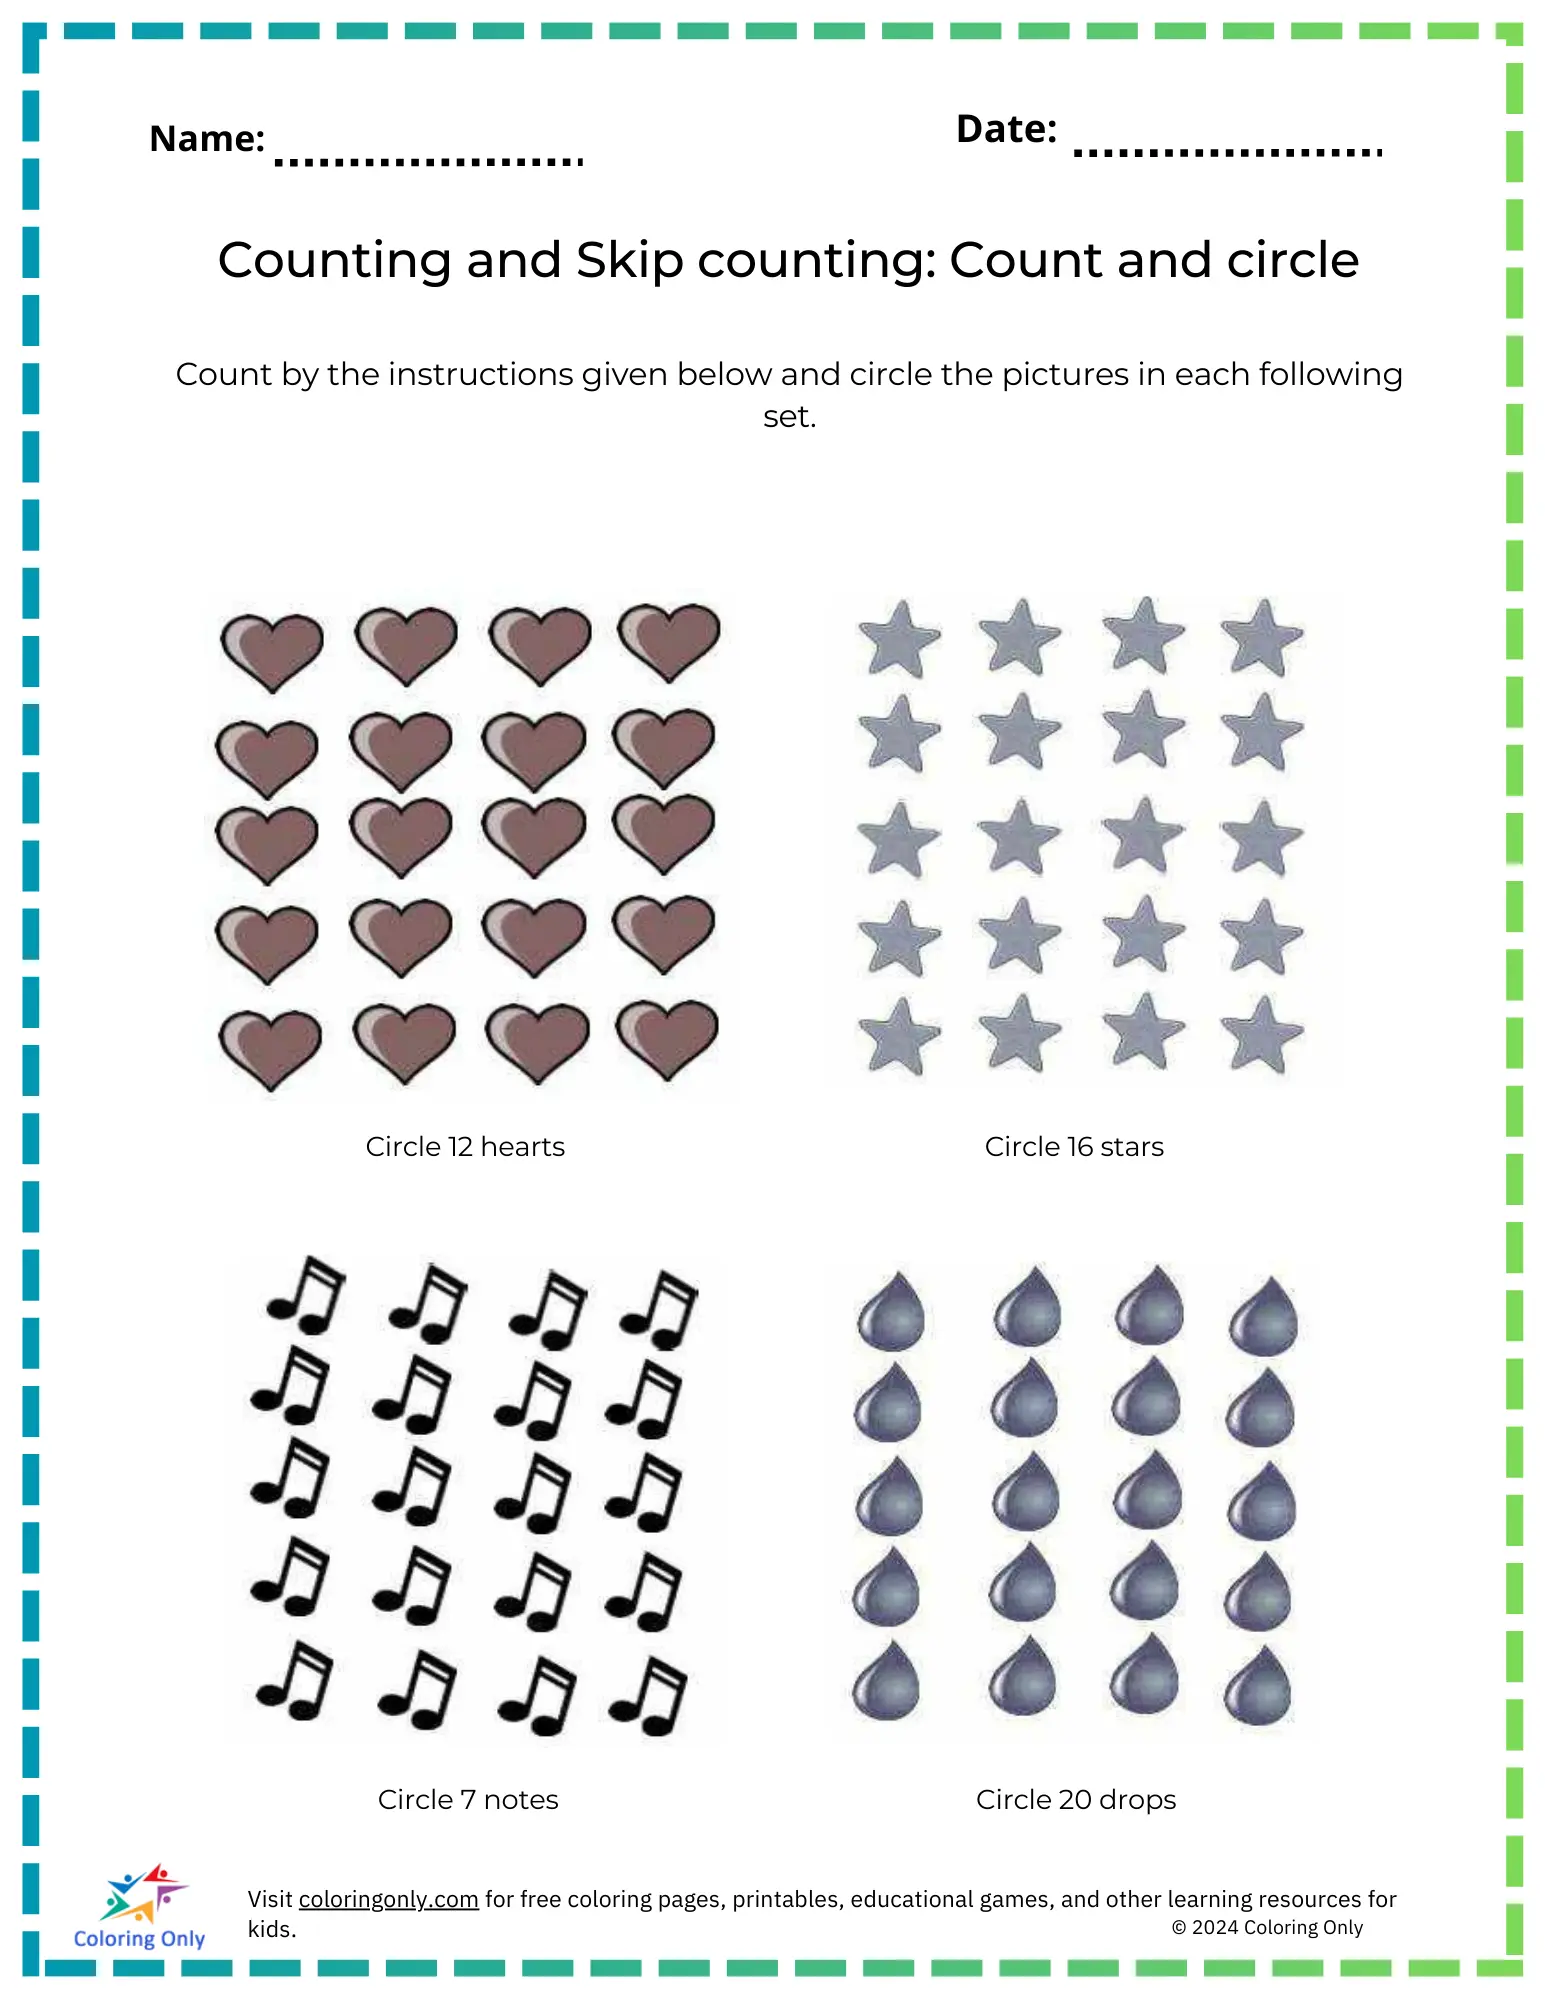 Counting And Skip Counting: Count And Circle Free Printable Worksheet